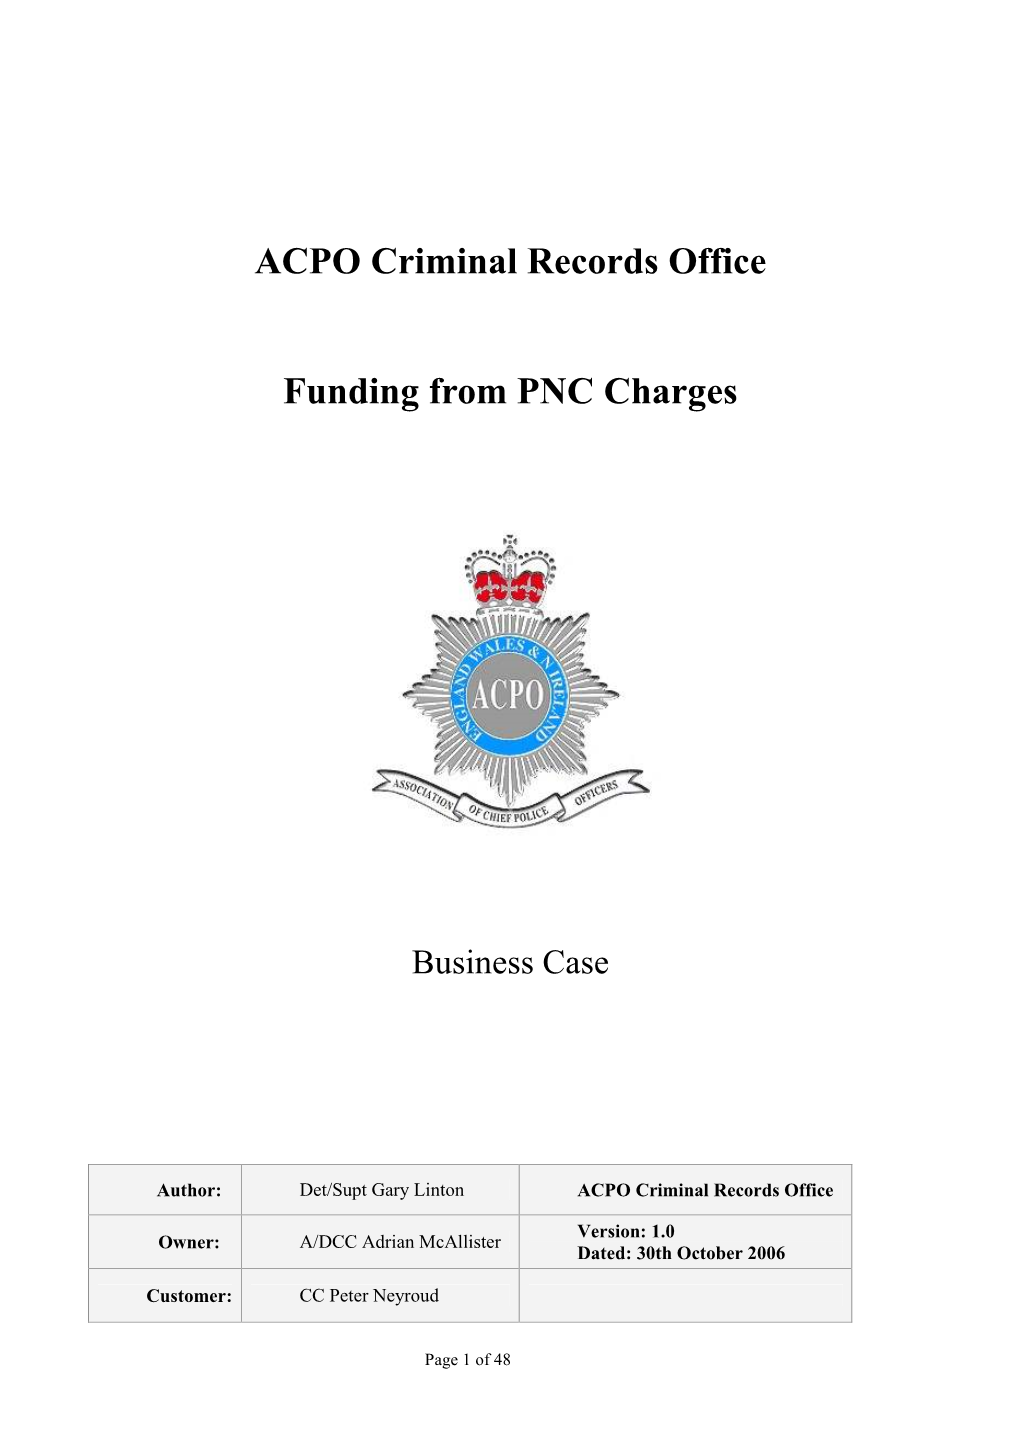 ACPO Criminal Records Office Funding from PNC Charges